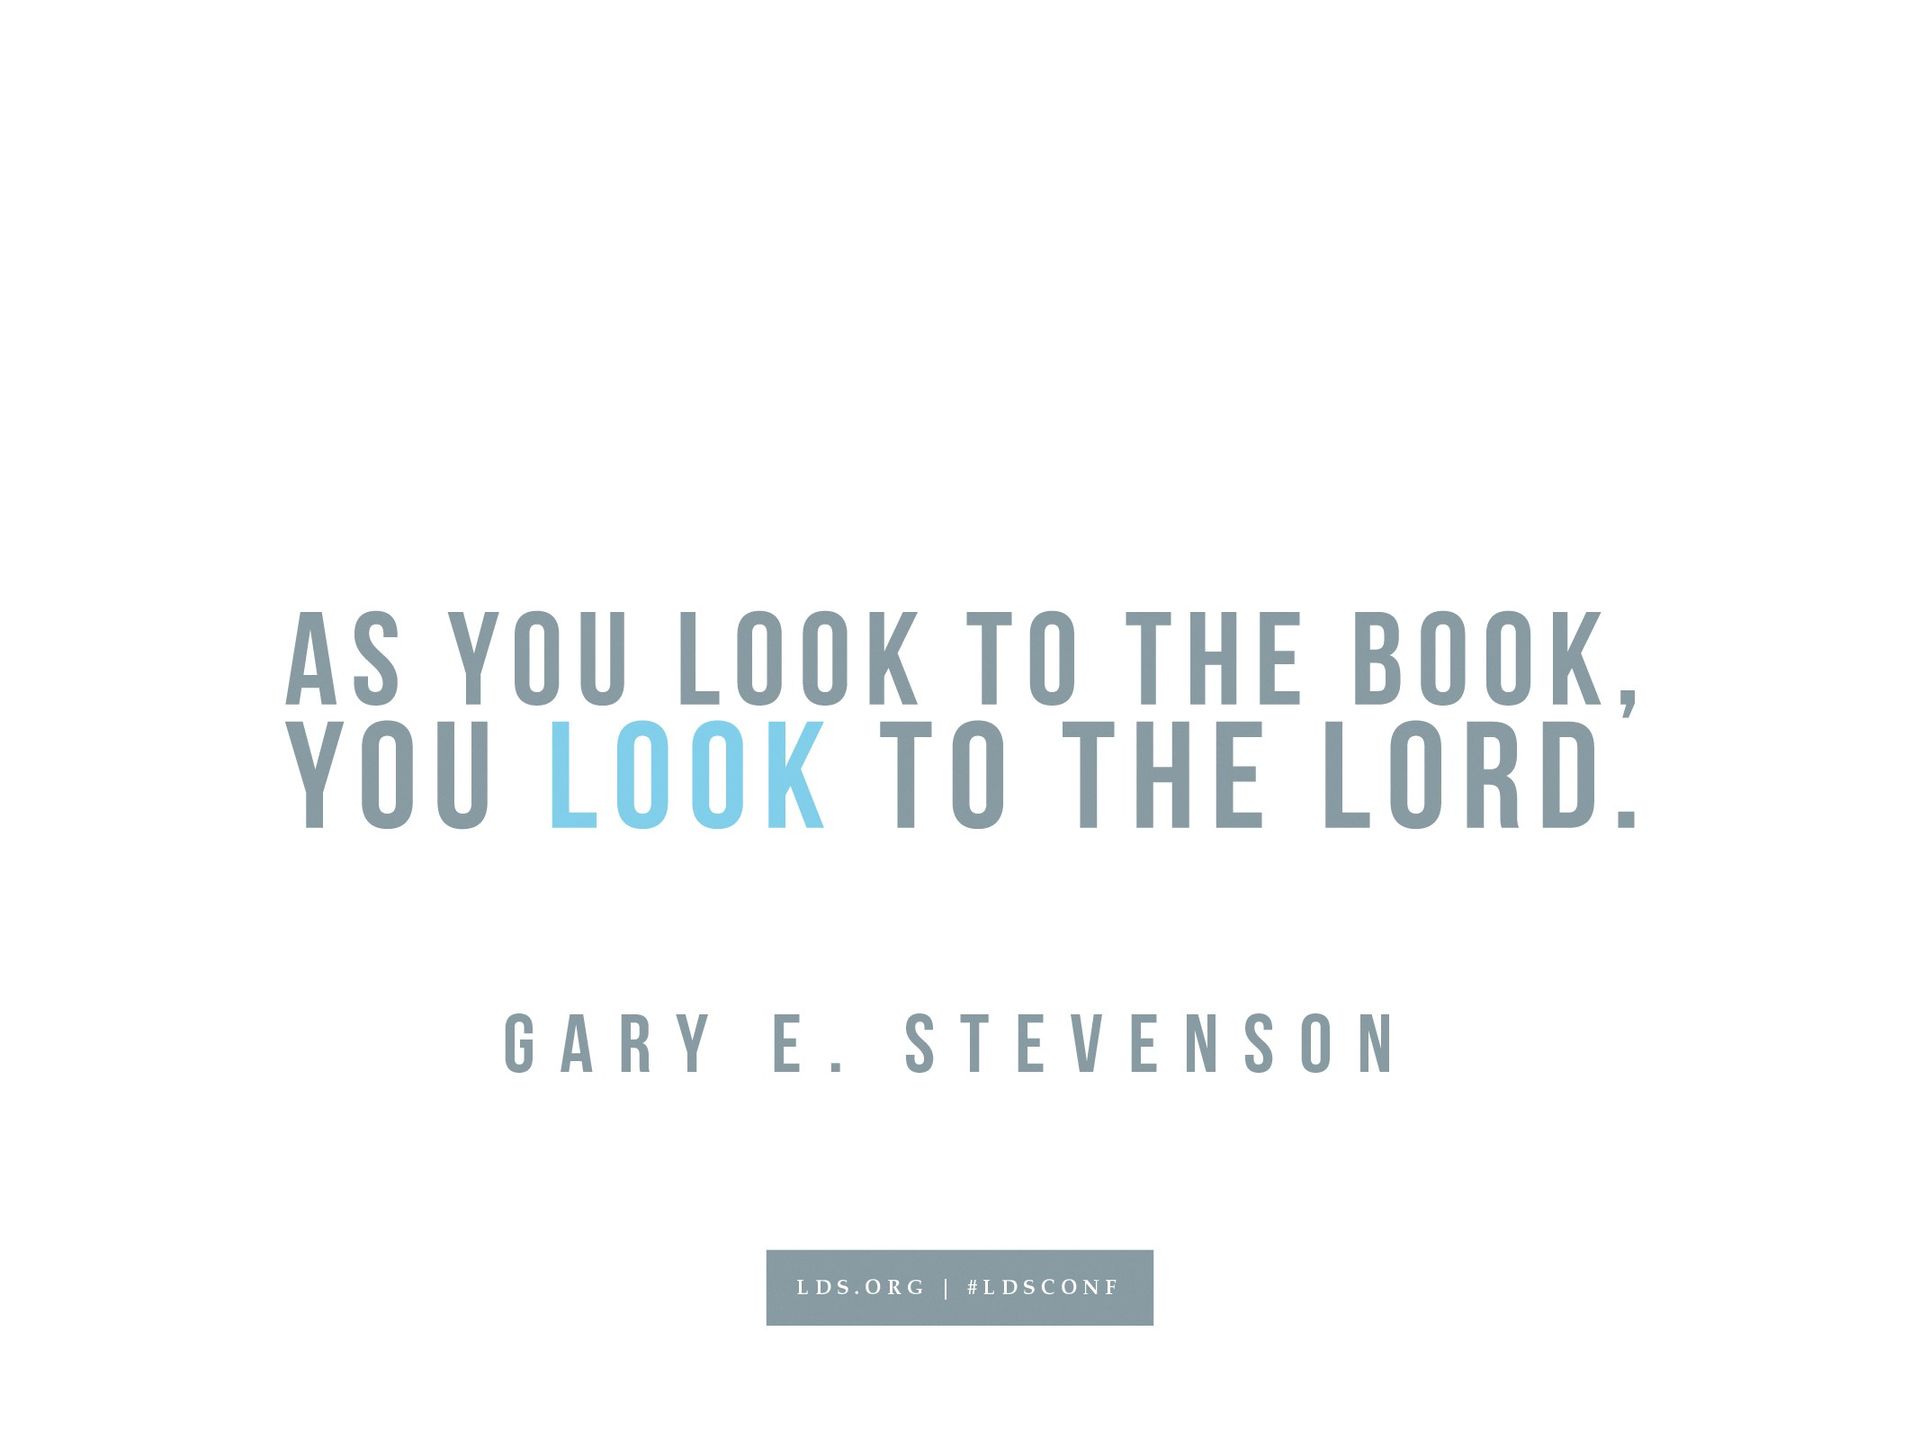 “As you look to the book, you look to the Lord.”—Gary E. Stevenson, “Look to the Book, Look to the Lord”